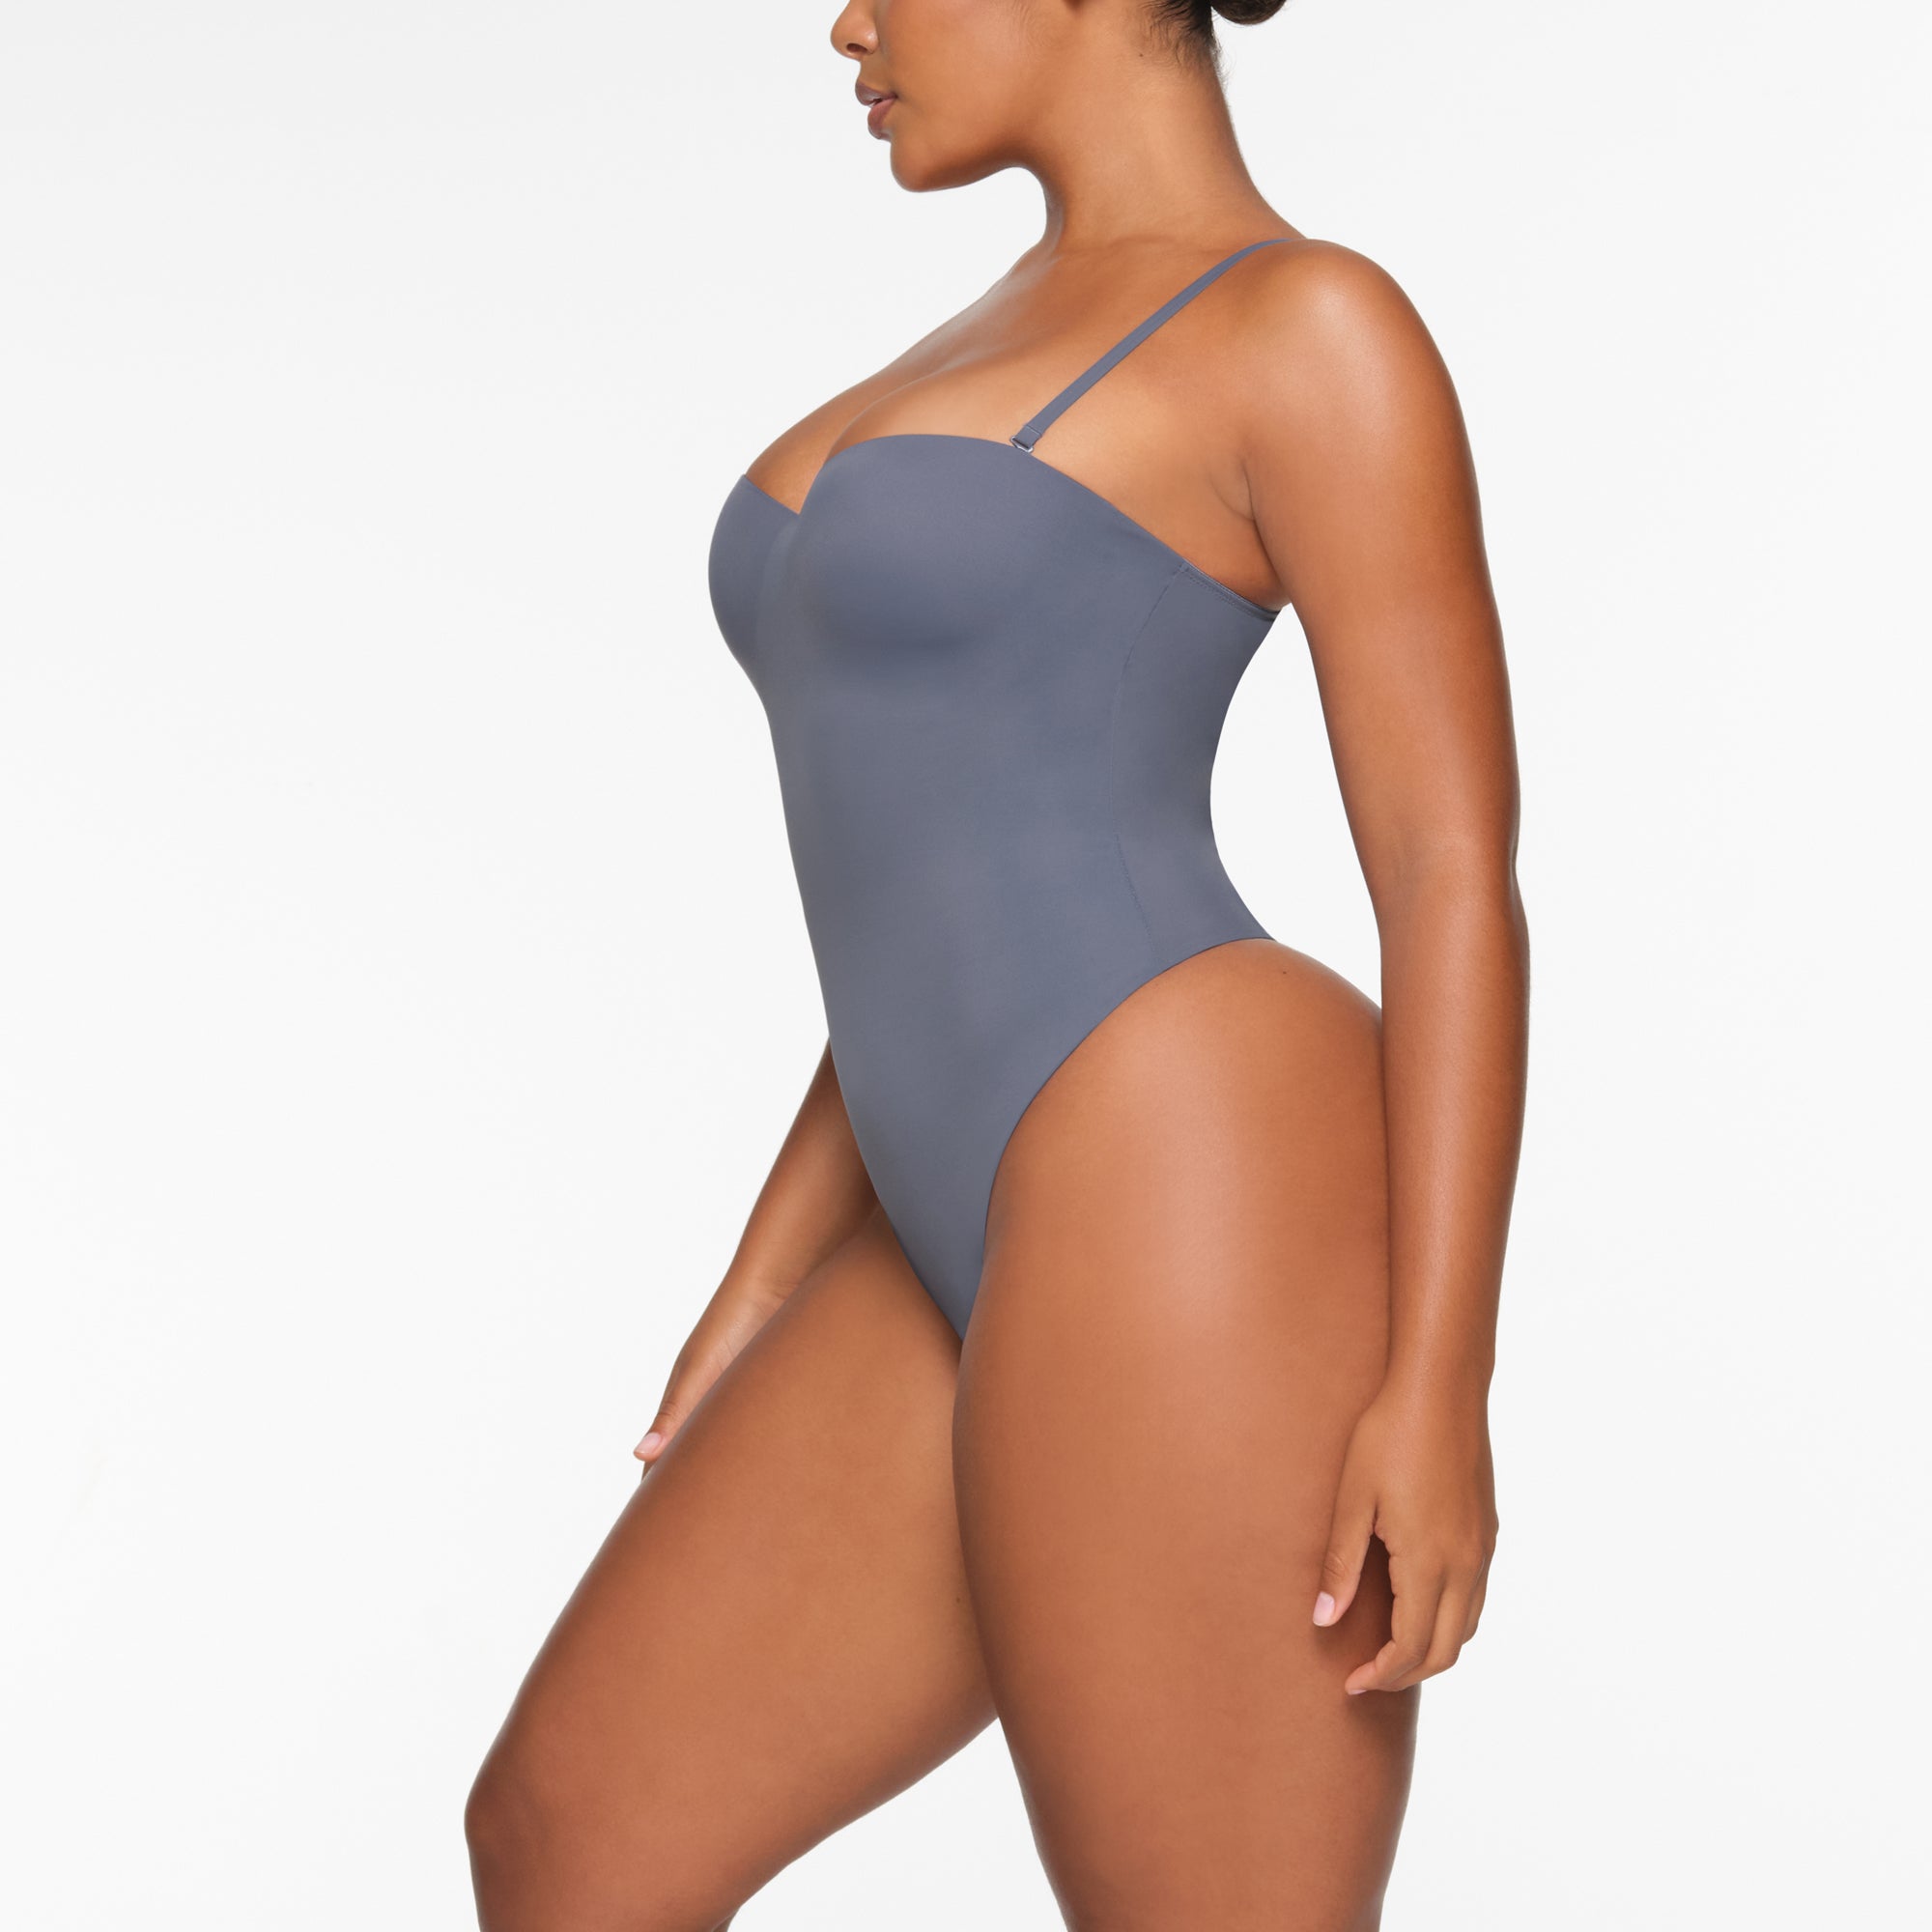 JUST DROPPED: CONTOUR LIFT. Introducing our first shapewear solutions with  cups! Lift and shape your bust with an all-new bodysuit and ta